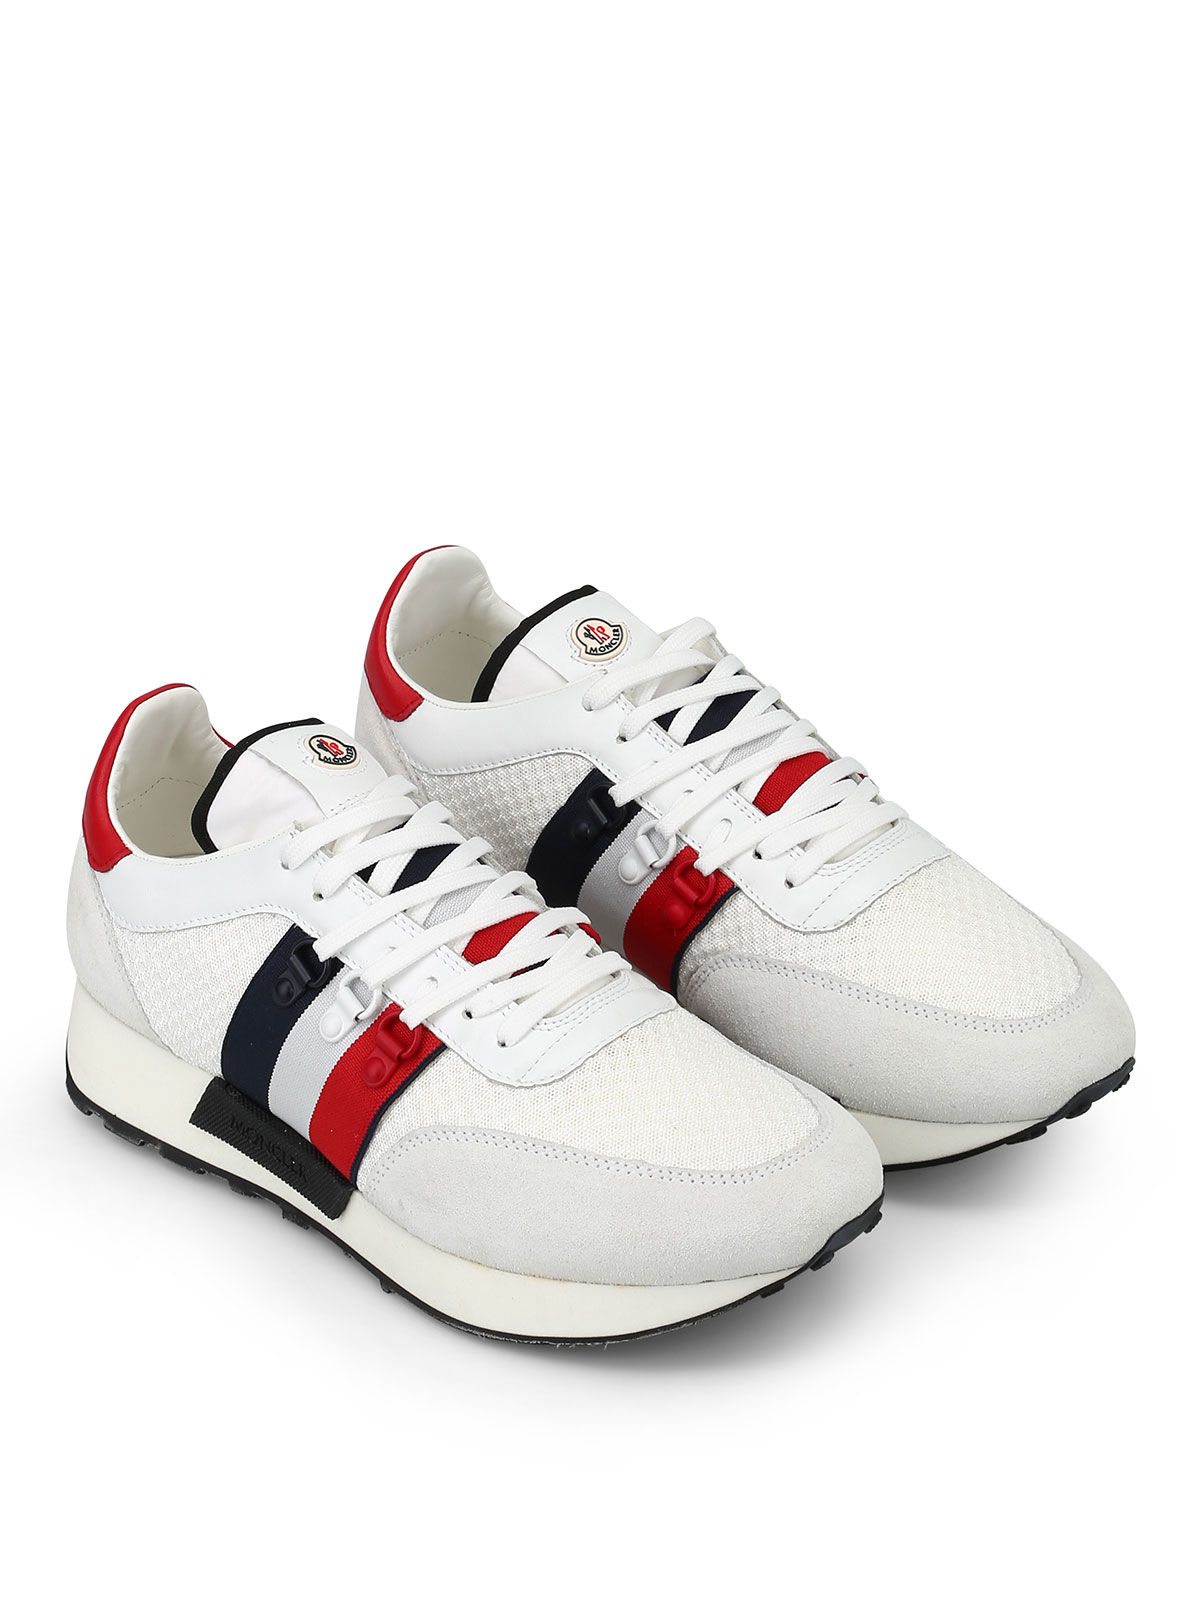 Moncler - New Horace white sneakers 